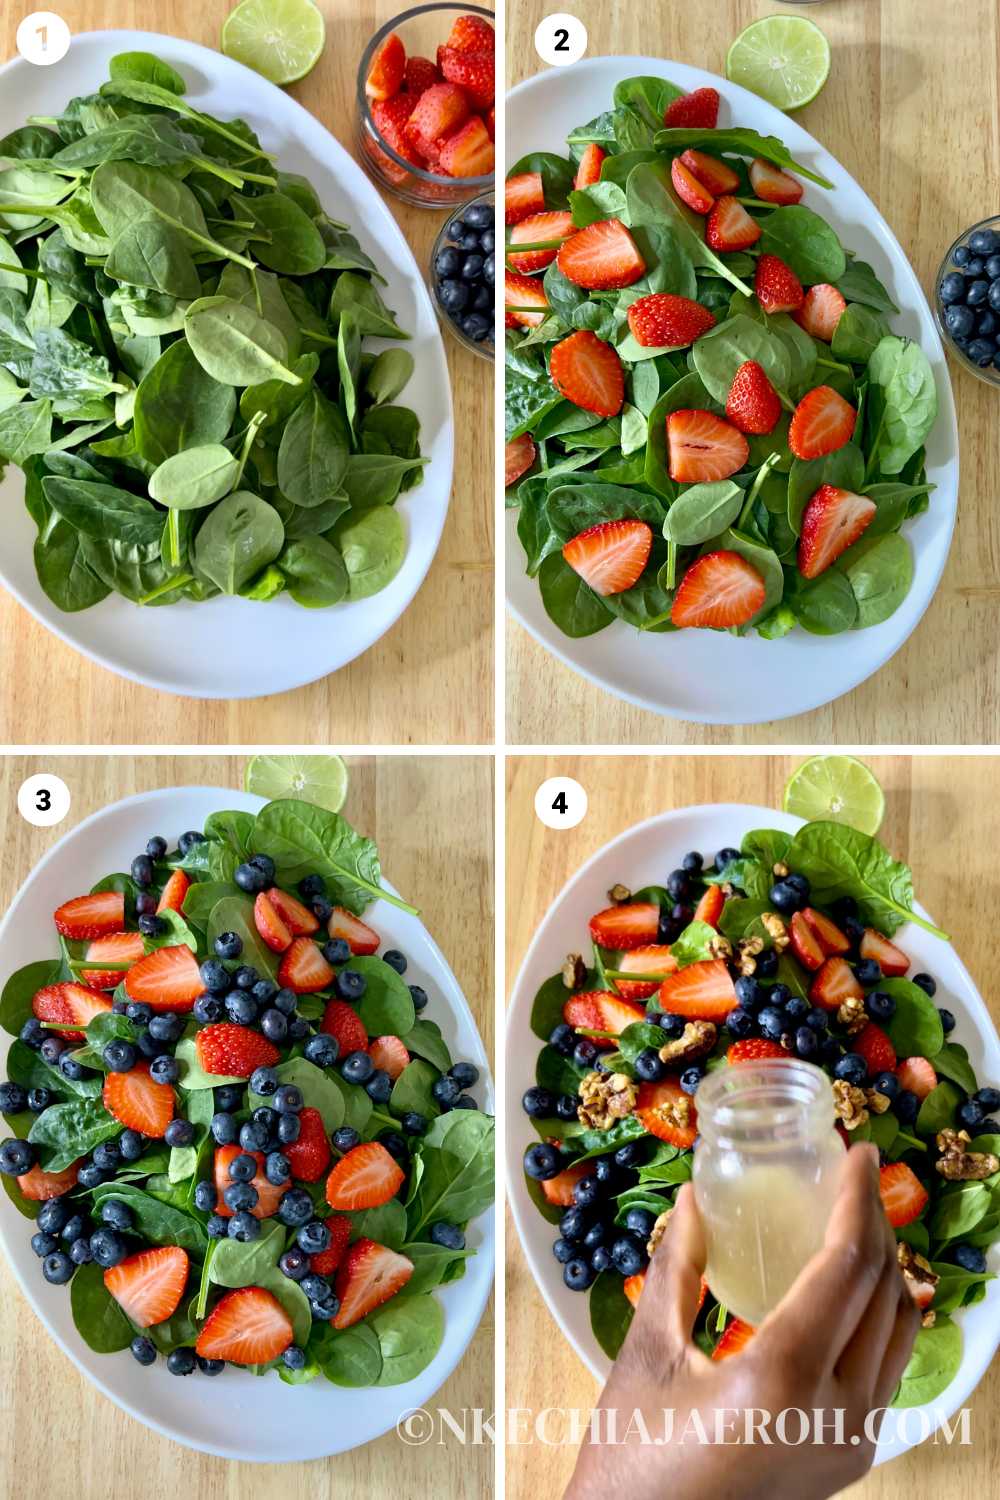 Super healthy and easy-to-make strawberry blueberry spinach salad, aka berry spinach salad with lime olive oil vinaigrette, is loaded with nutritious antioxidants, vitamins, and minerals. Amazingly this spinach and berry salad calls for only a few ingredients - spinach, strawberries, blueberries, walnuts, and a simple lime olive oil vinaigrette! This strawberry blueberry spinach is low-carb, gluten-free, vegan, and easily customizable. #Salad #Spinachsalad #healthysalad #Strawberrysalad #detoxsalad #vegan #lowcarb